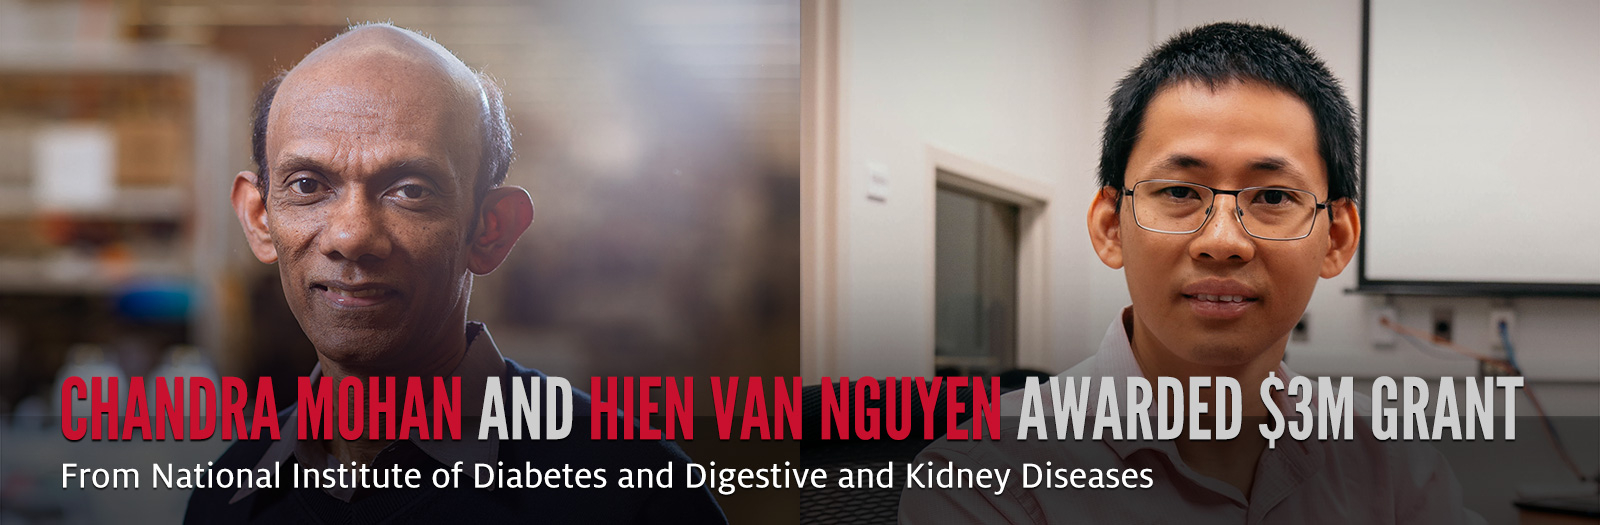 Chandra Mohan and Hien Van Nguyen Awarded $3M Grant From National Institute of Diabetes and Digestive and Kidney Diseases